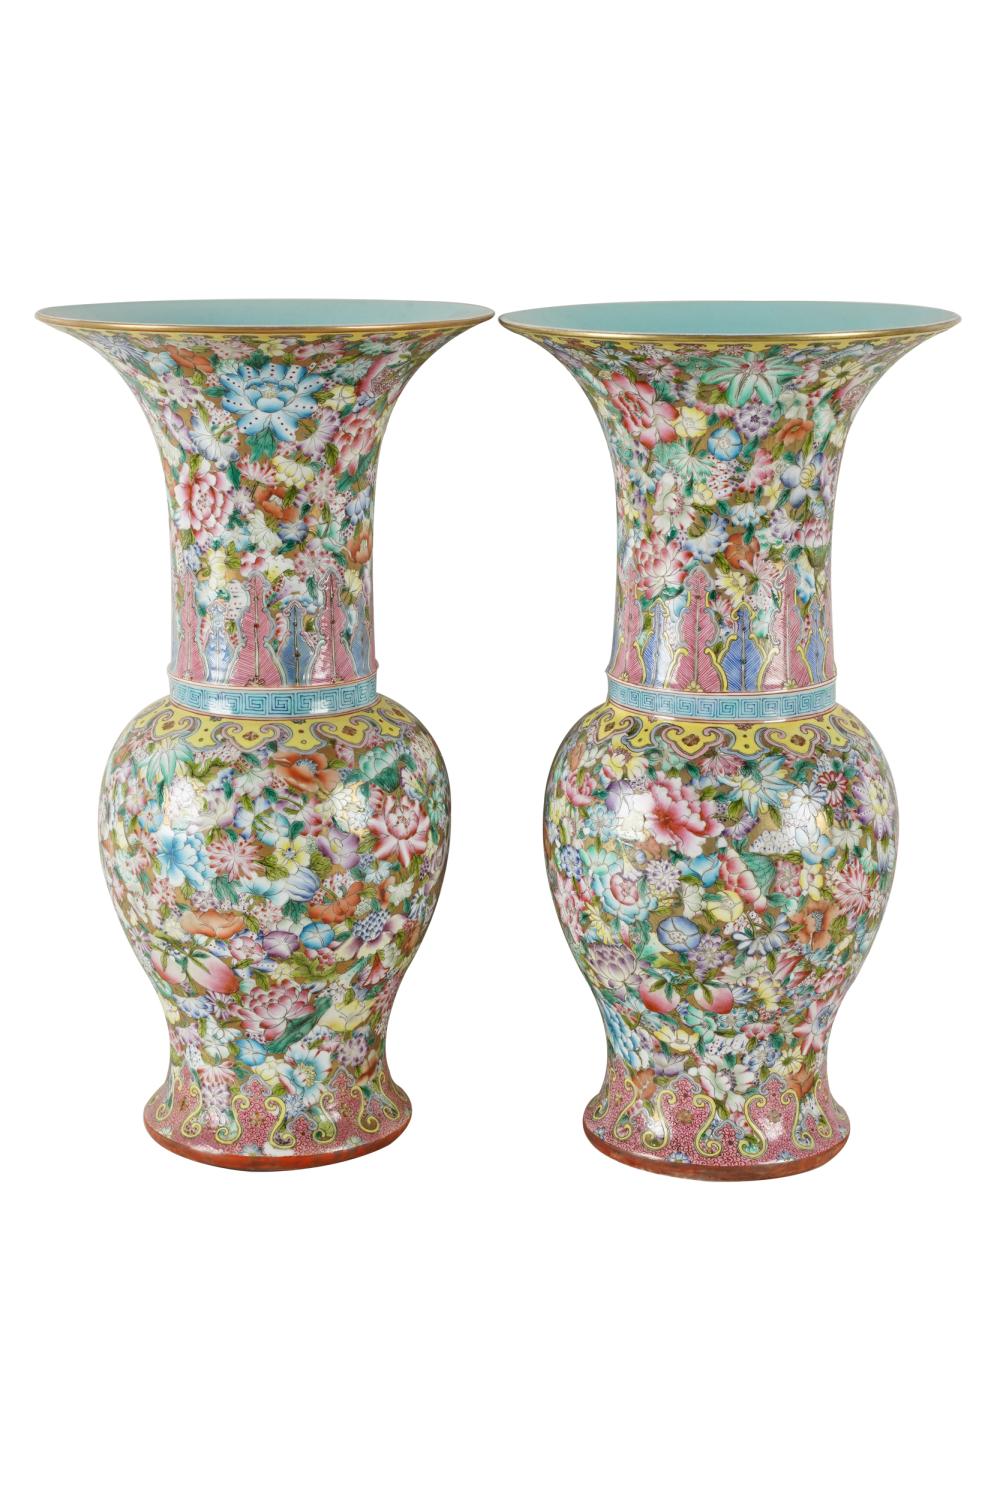 PAIR OF CHINESE PORCELAIN VASESwith 3335da